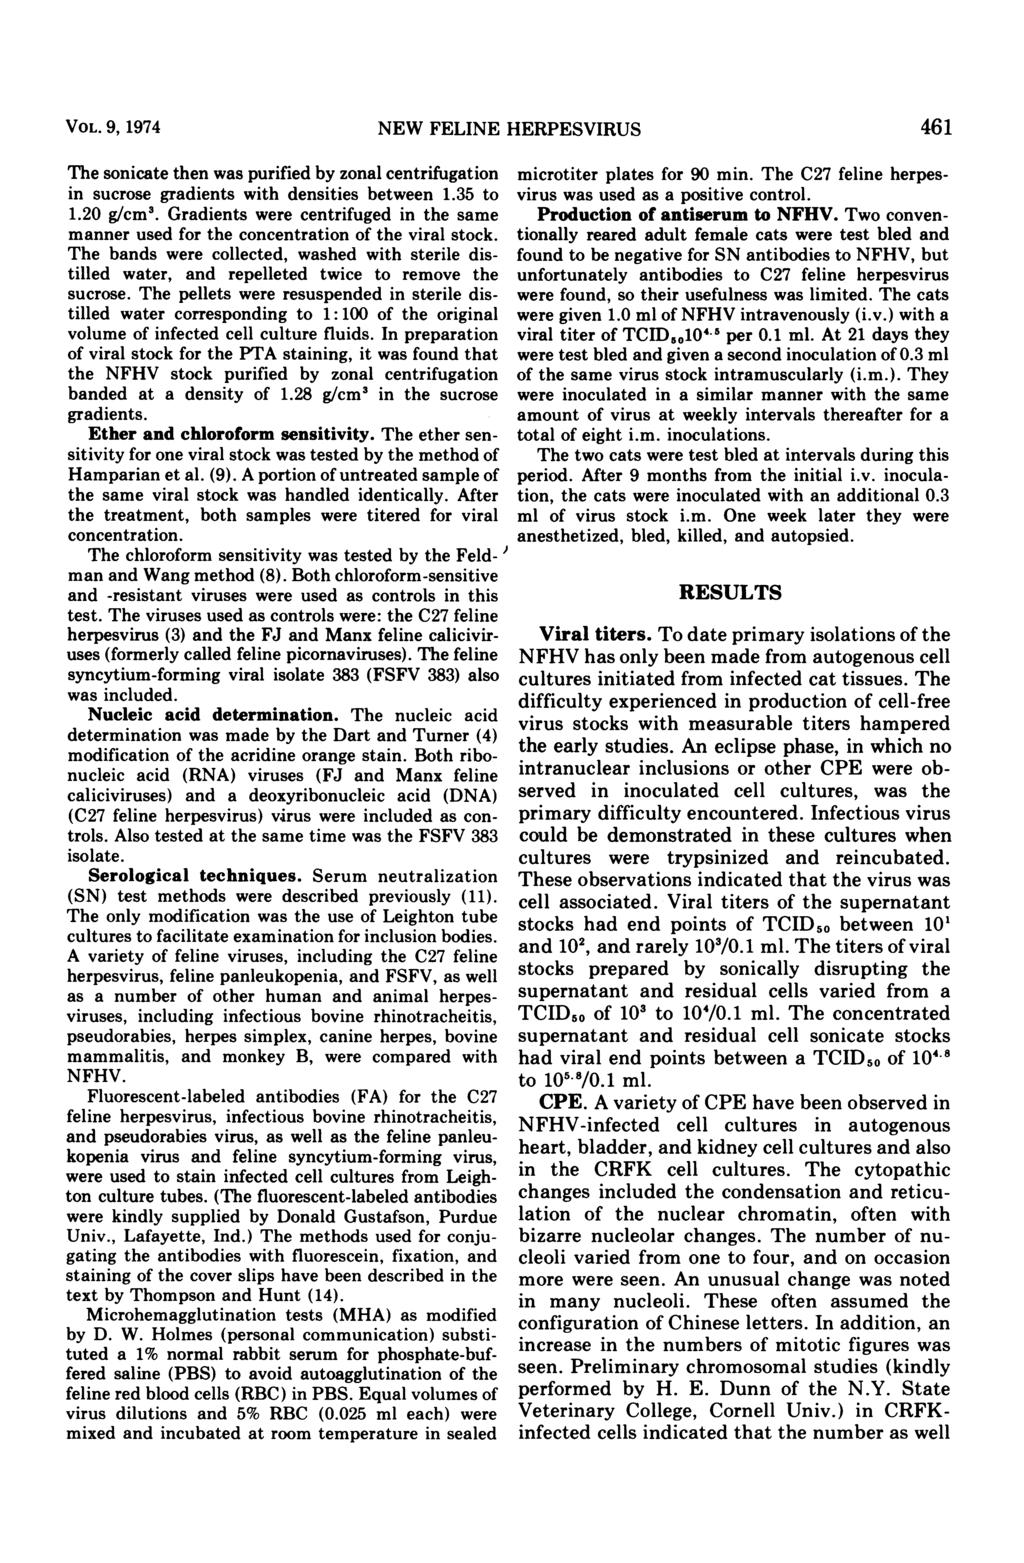 VOL. 9, 1974 NEW FELINE HERPESVIRUS 461 The sonicate then was purified by zonal centrifugation in sucrose gradients with densities between 1.35 to 1.20 g/cm3.